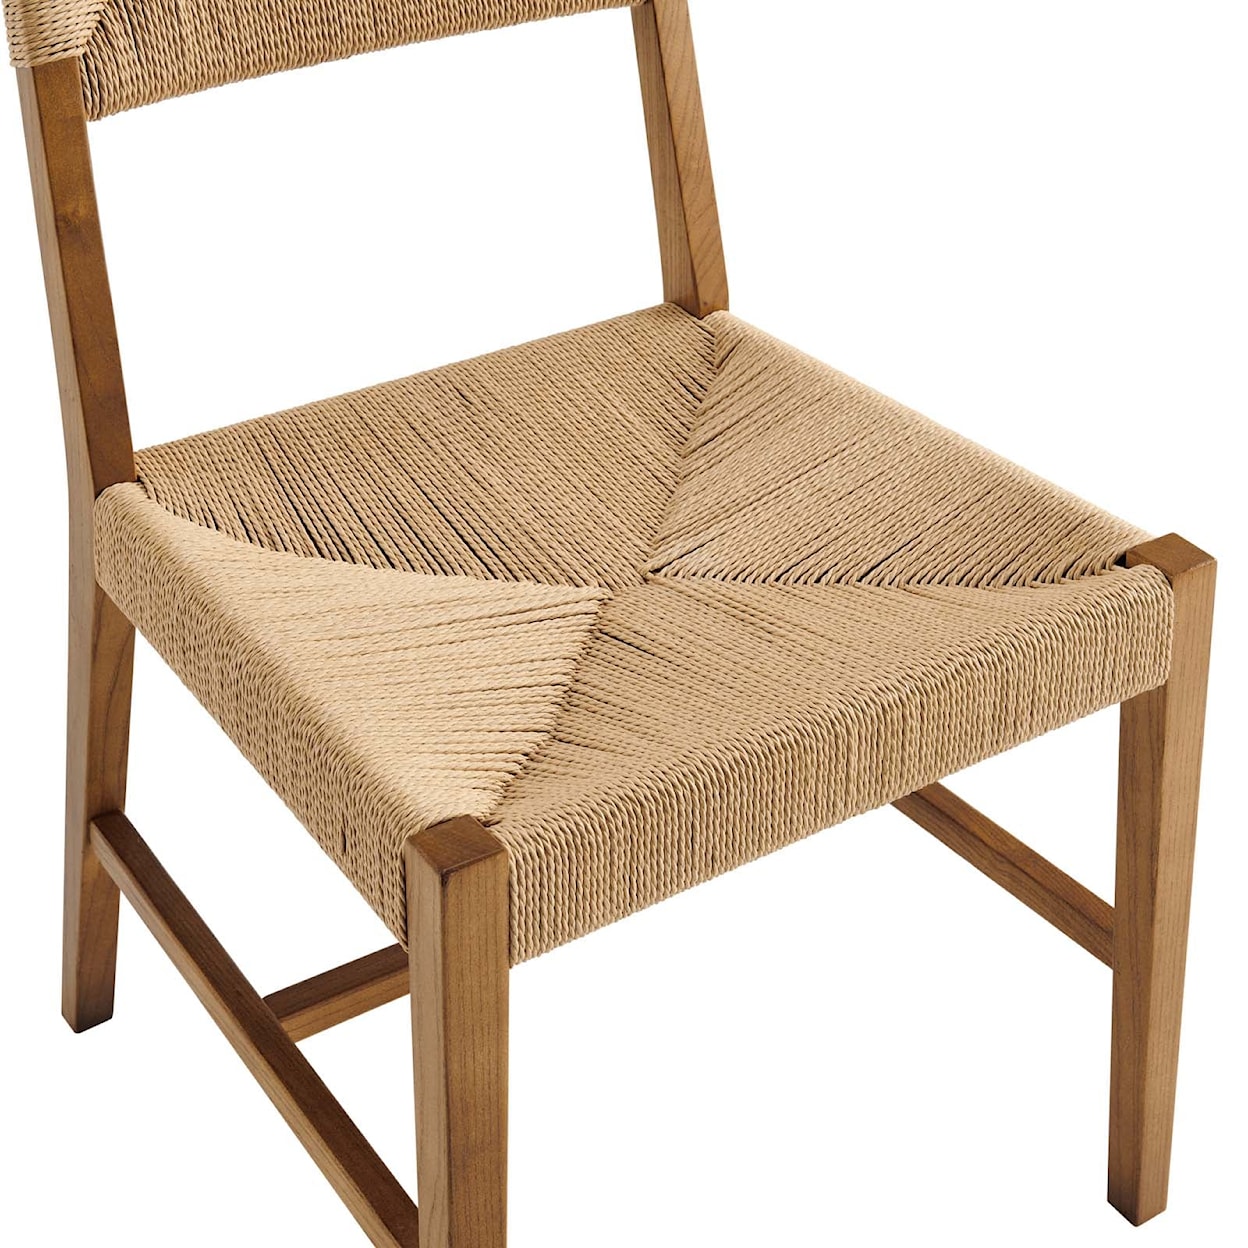 Modway Bodie Bodie Wood Dining Chair